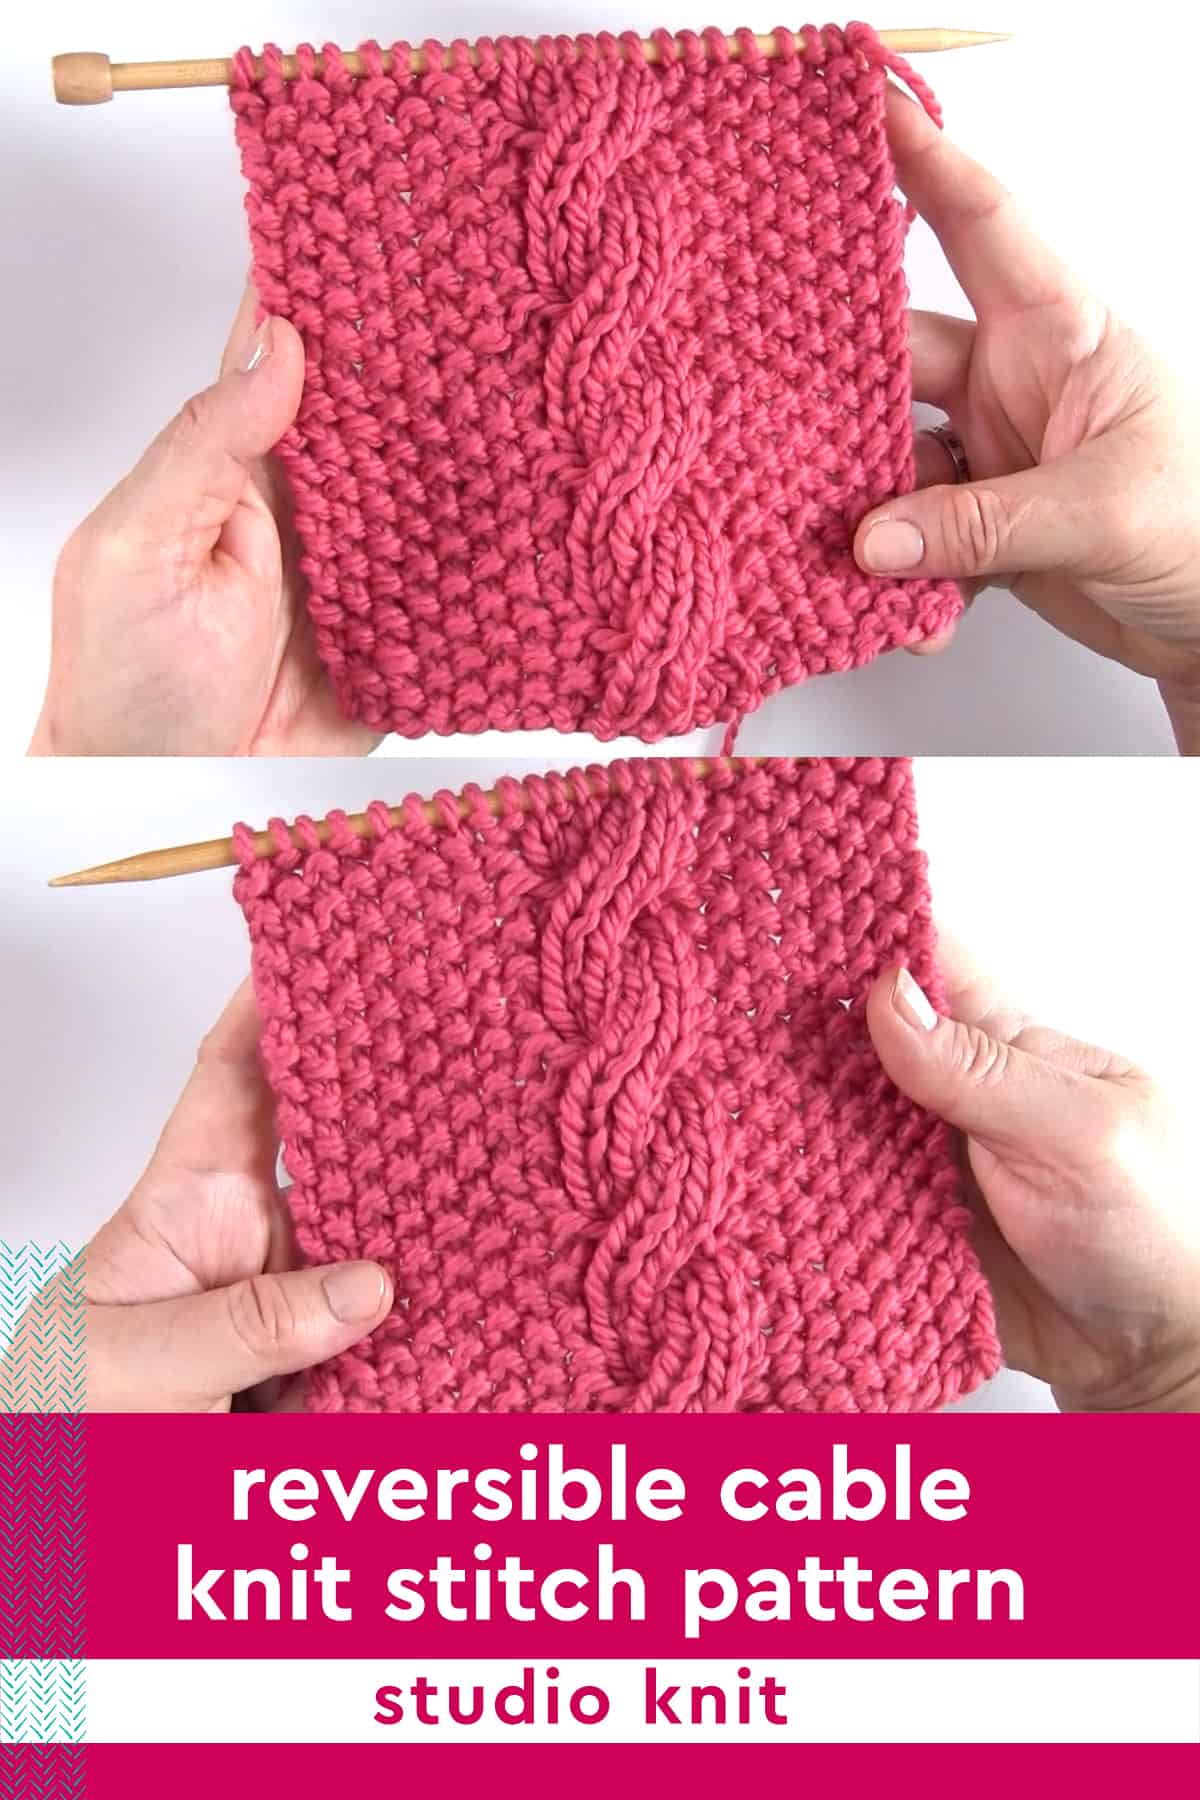 How to Knit Reversible Cable Ribbles - Studio Knit